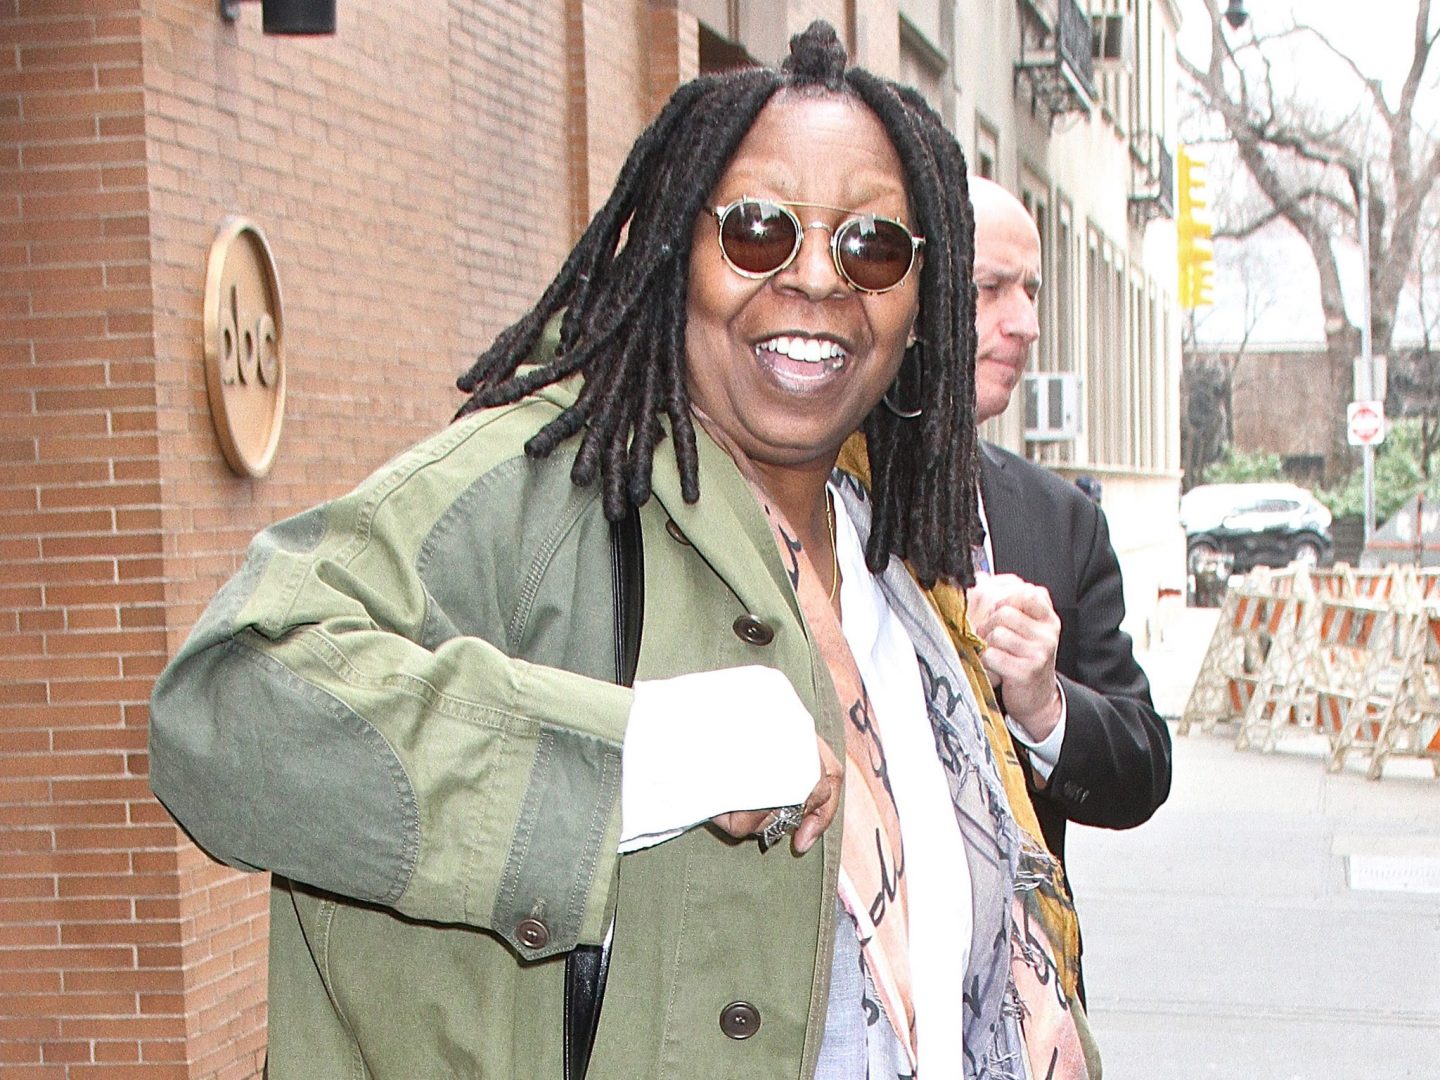 Whoopi Goldberg reveals she is 'working diligently' on 'Sister Act 3'